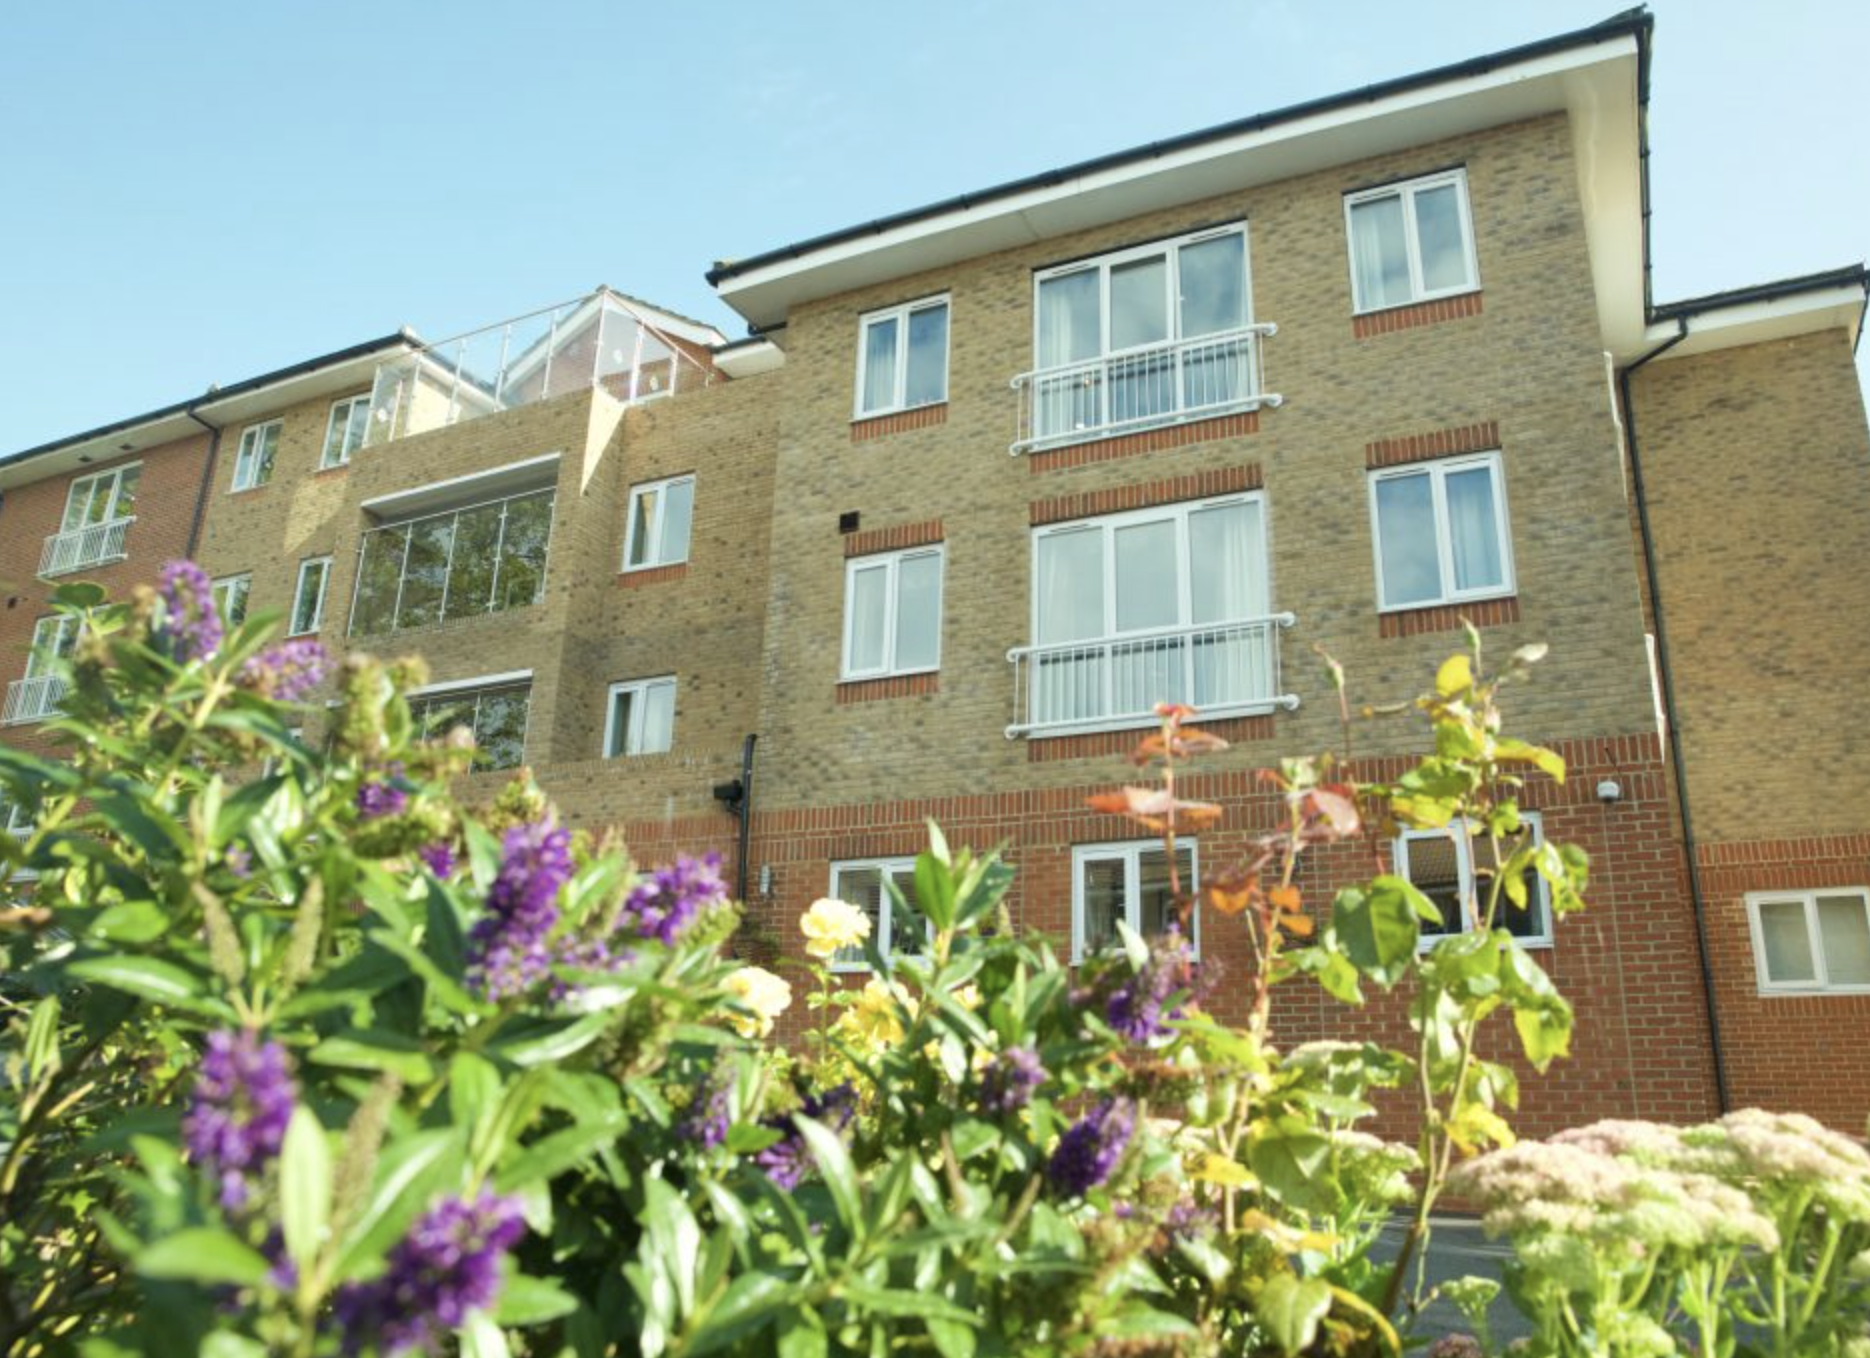 Exterior of Carlton Court care home in Barnet, London